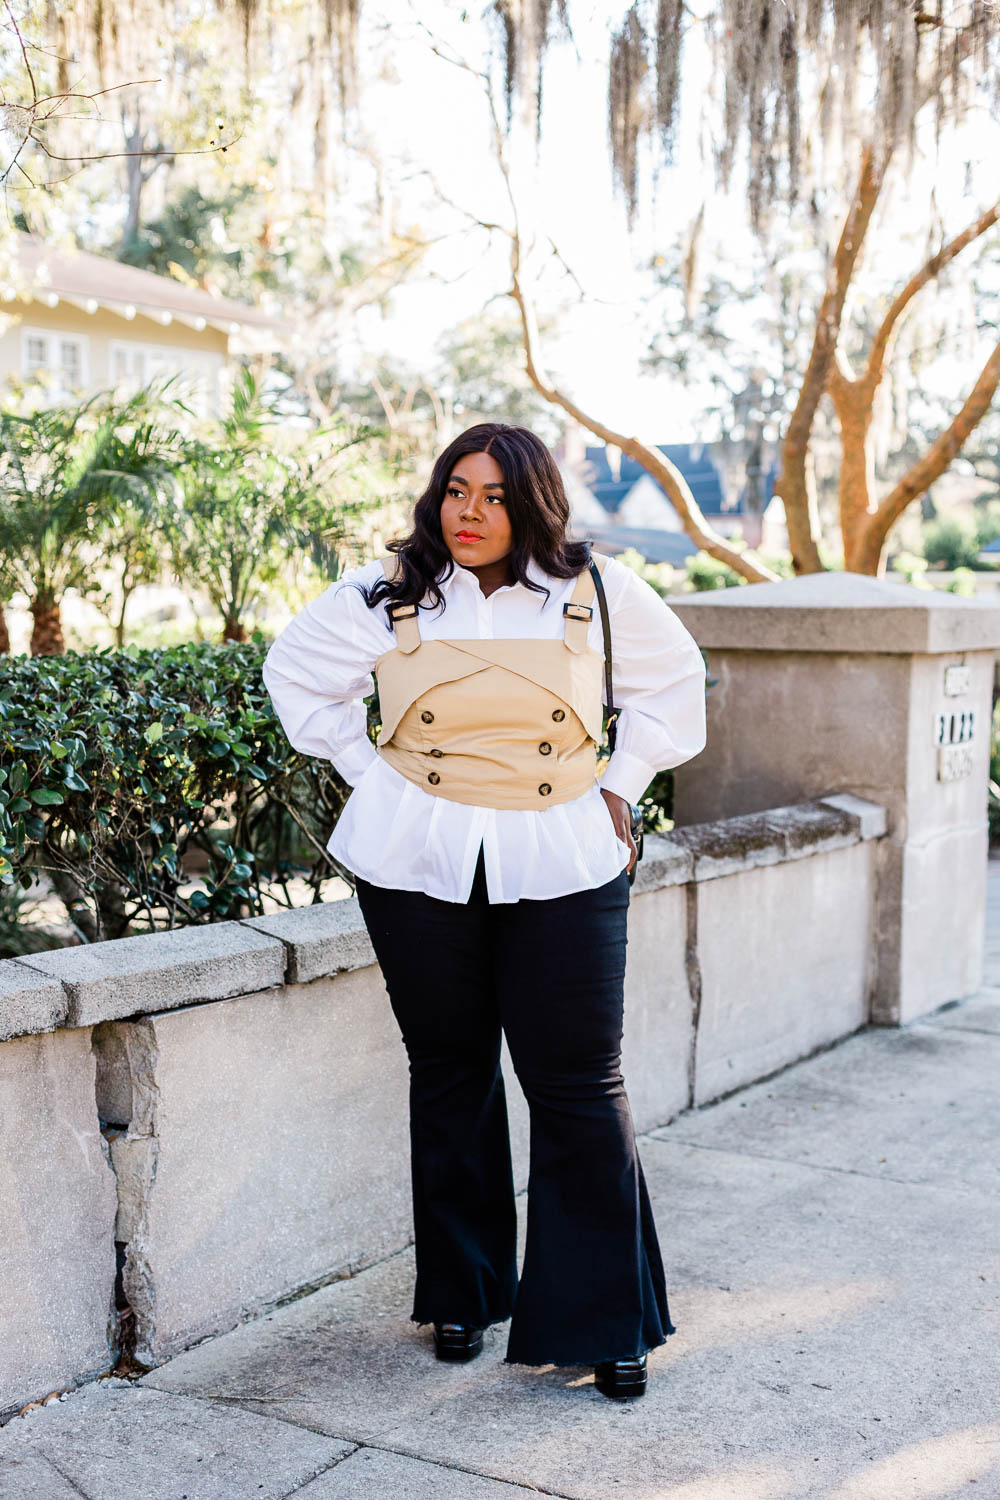 Plus Size Fashion, Thamarr, Musings of a Curvy Lady, Plus Size Flare Jeans, Anthropologie Model, White Button Down Shirt, How to Style a White Button Down Shirt